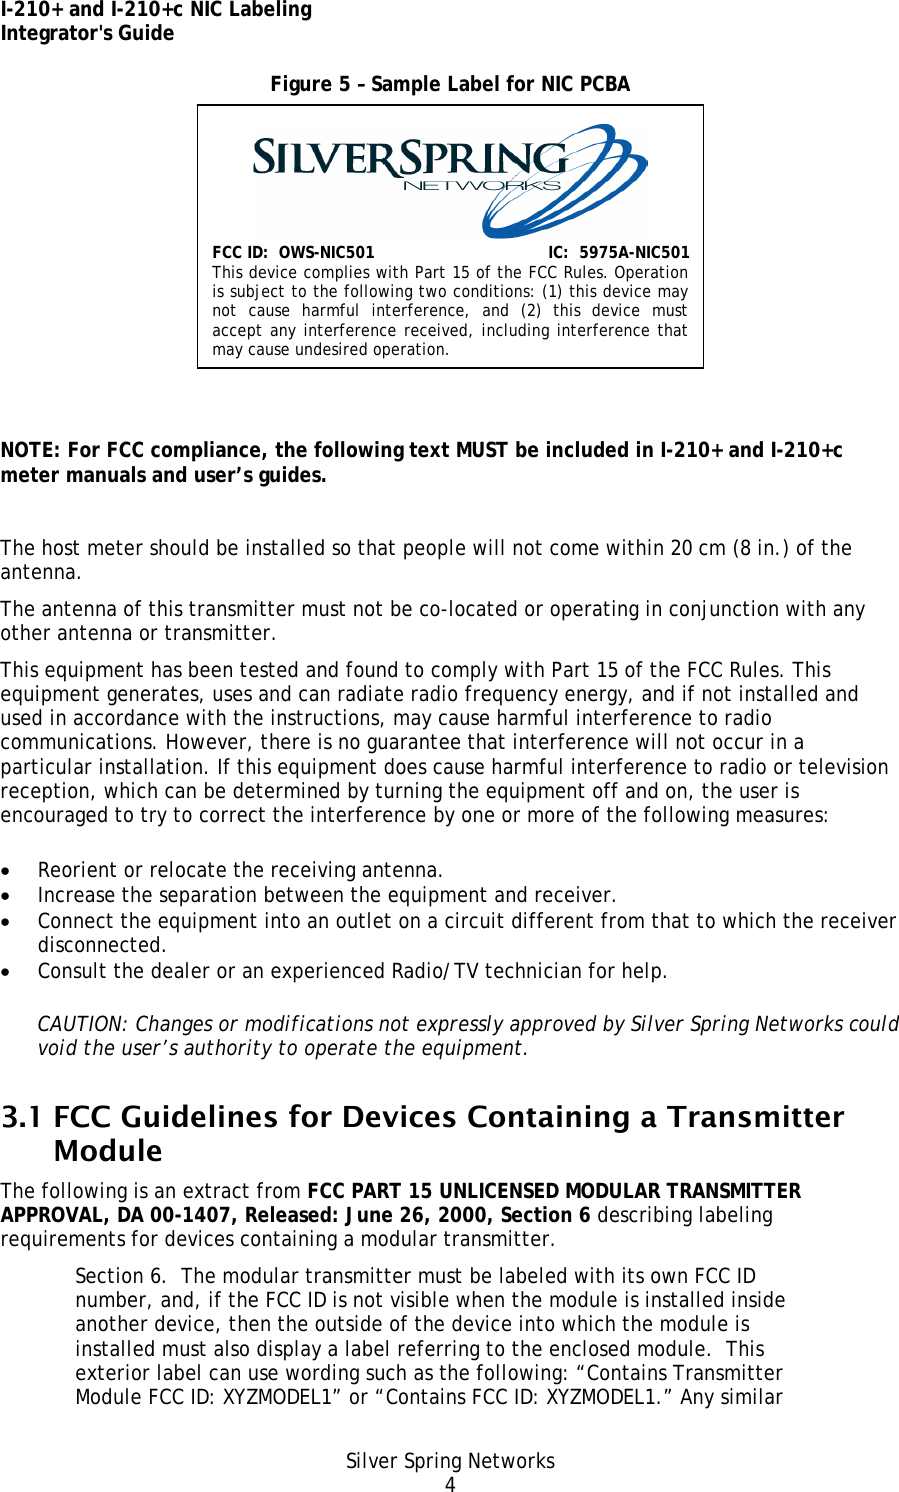 I-210+ and I-210+c NIC Labeling Integrator&apos;s Guide Silver Spring Networks 4 Figure 5 – Sample Label for NIC PCBA    NOTE: For FCC compliance, the following text MUST be included in I-210+ and I-210+c meter manuals and user’s guides.  The host meter should be installed so that people will not come within 20 cm (8 in.) of the antenna. The antenna of this transmitter must not be co-located or operating in conjunction with any other antenna or transmitter. This equipment has been tested and found to comply with Part 15 of the FCC Rules. This equipment generates, uses and can radiate radio frequency energy, and if not installed and used in accordance with the instructions, may cause harmful interference to radio communications. However, there is no guarantee that interference will not occur in a particular installation. If this equipment does cause harmful interference to radio or television reception, which can be determined by turning the equipment off and on, the user is encouraged to try to correct the interference by one or more of the following measures: • Reorient or relocate the receiving antenna. • Increase the separation between the equipment and receiver. • Connect the equipment into an outlet on a circuit different from that to which the receiver disconnected. • Consult the dealer or an experienced Radio/TV technician for help. CAUTION: Changes or modifications not expressly approved by Silver Spring Networks could void the user’s authority to operate the equipment. 3.1 FCC Guidelines for Devices Containing a Transmitter Module The following is an extract from FCC PART 15 UNLICENSED MODULAR TRANSMITTER APPROVAL, DA 00-1407, Released: June 26, 2000, Section 6 describing labeling requirements for devices containing a modular transmitter. Section 6.  The modular transmitter must be labeled with its own FCC ID number, and, if the FCC ID is not visible when the module is installed inside another device, then the outside of the device into which the module is installed must also display a label referring to the enclosed module.  This exterior label can use wording such as the following: “Contains Transmitter Module FCC ID: XYZMODEL1” or “Contains FCC ID: XYZMODEL1.” Any similar FCC ID:  OWS-NIC501  IC:  5975A-NIC501 This device complies with Part 15 of the FCC Rules. Operation is subject to the following two conditions: (1) this device may not cause harmful interference, and (2) this device must accept any interference received, including interference that may cause undesired operation. 